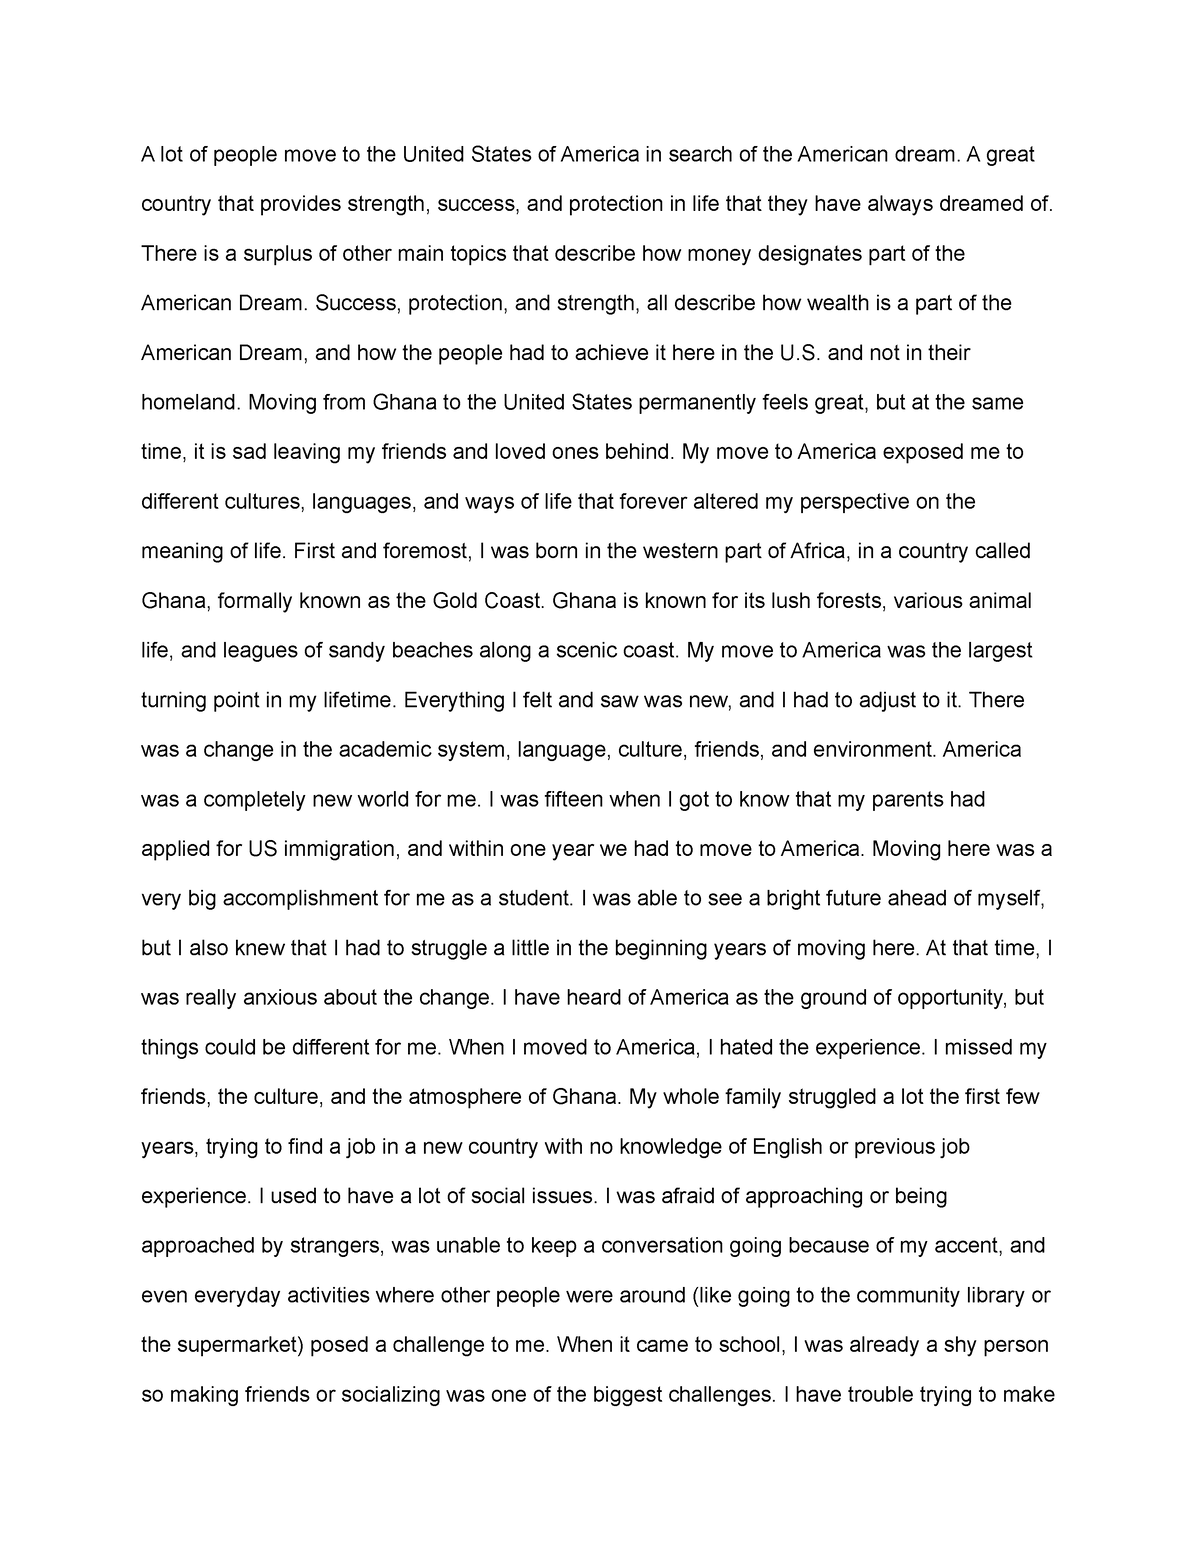 moving to a different country college essay